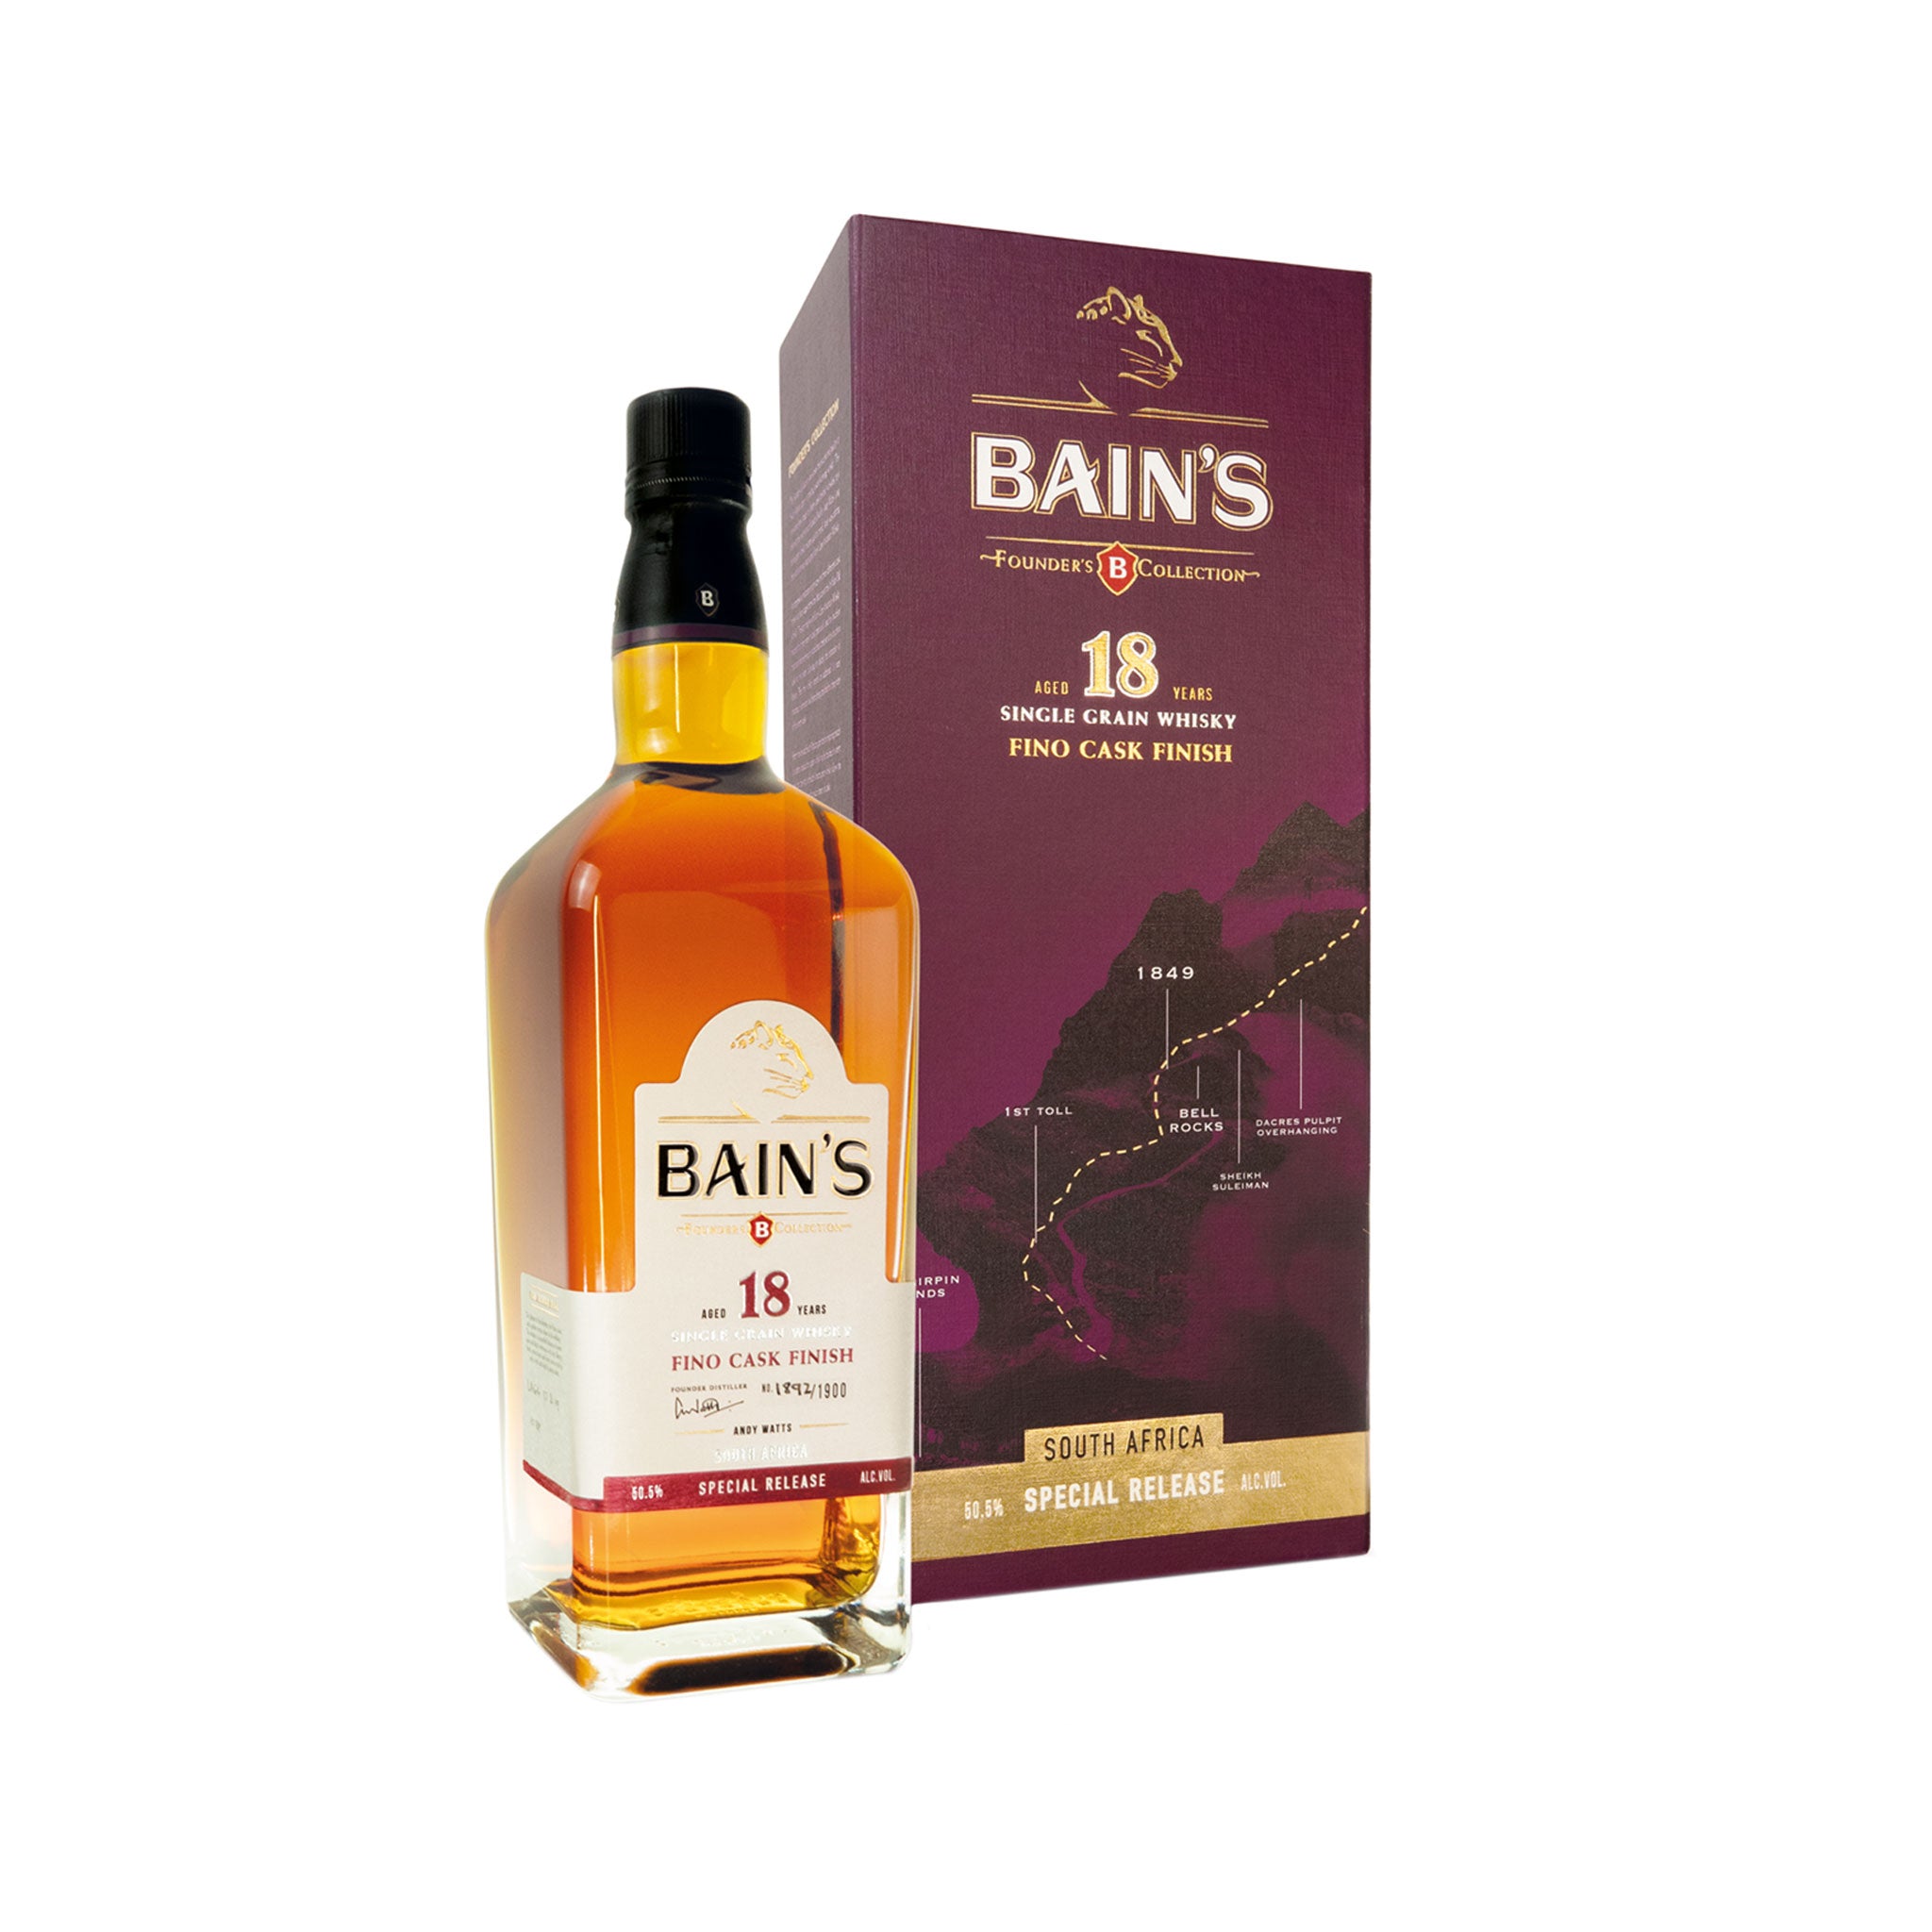 Bain's Founders Collection Whisky 18 Year Old Fino Cask Finish